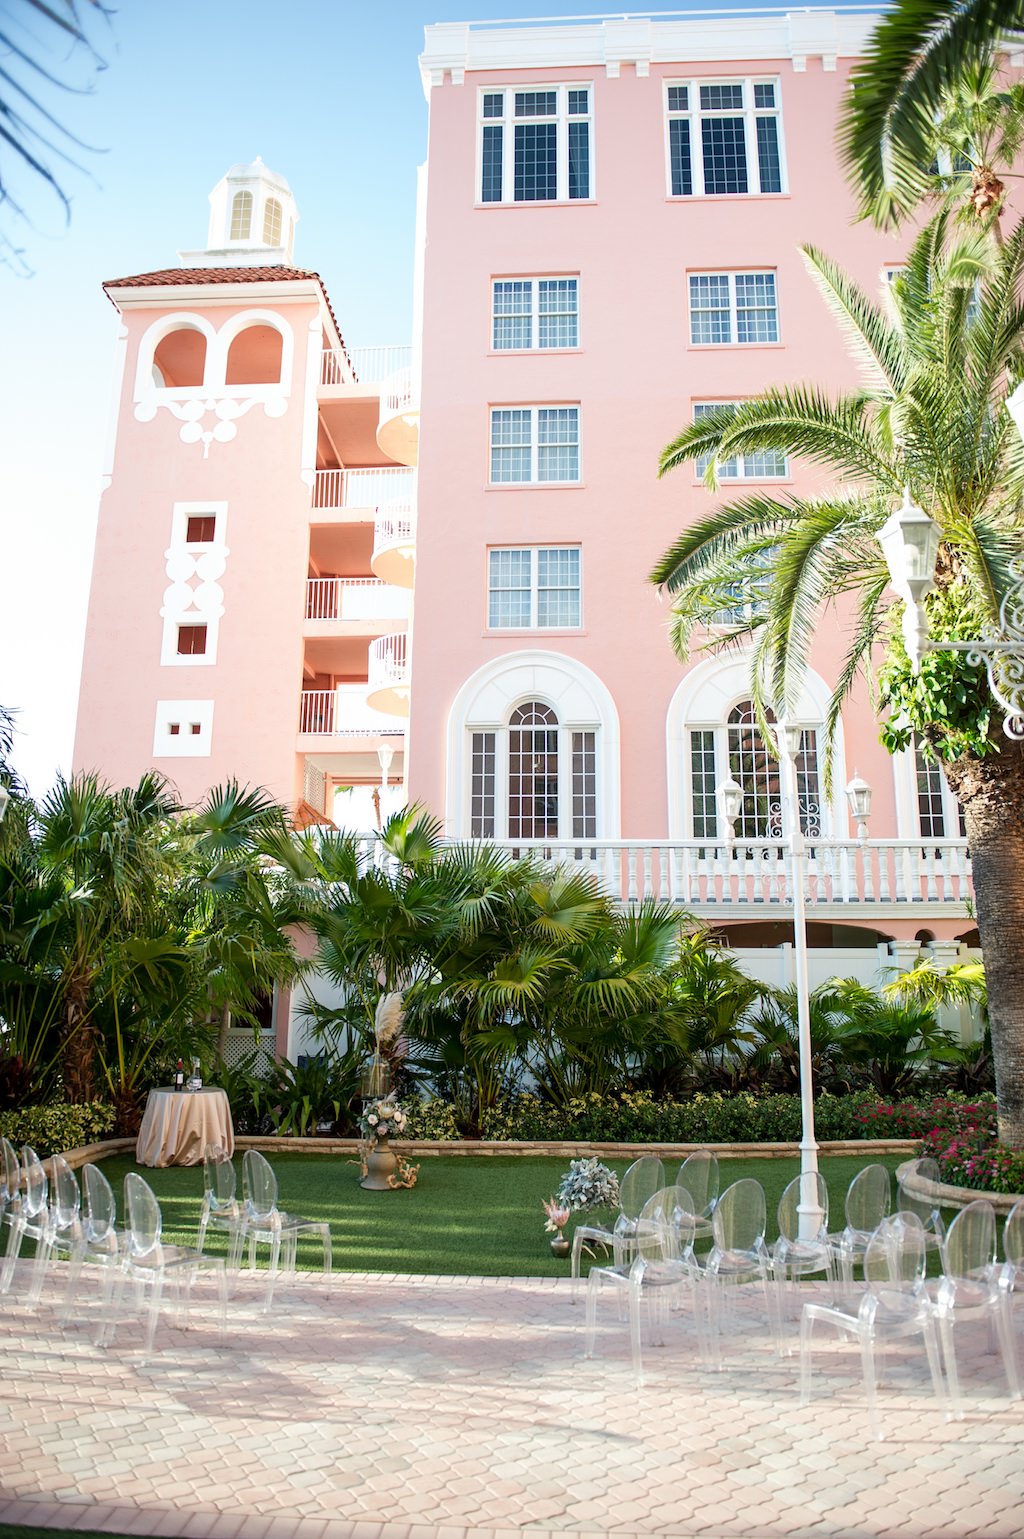 Chic Neutral Tone Modern Outdoor Ceremony with Ghost Acrylic Chairs | St. Pete Beach Resort Wedding Venue The Don Cesar | Tampa Bay Wedding Photographer Andi Diamond Photography| Tampa Wedding Rentals A Chair Affair | Tampa Bay Wedding Planner UNIQUE Weddings + Events